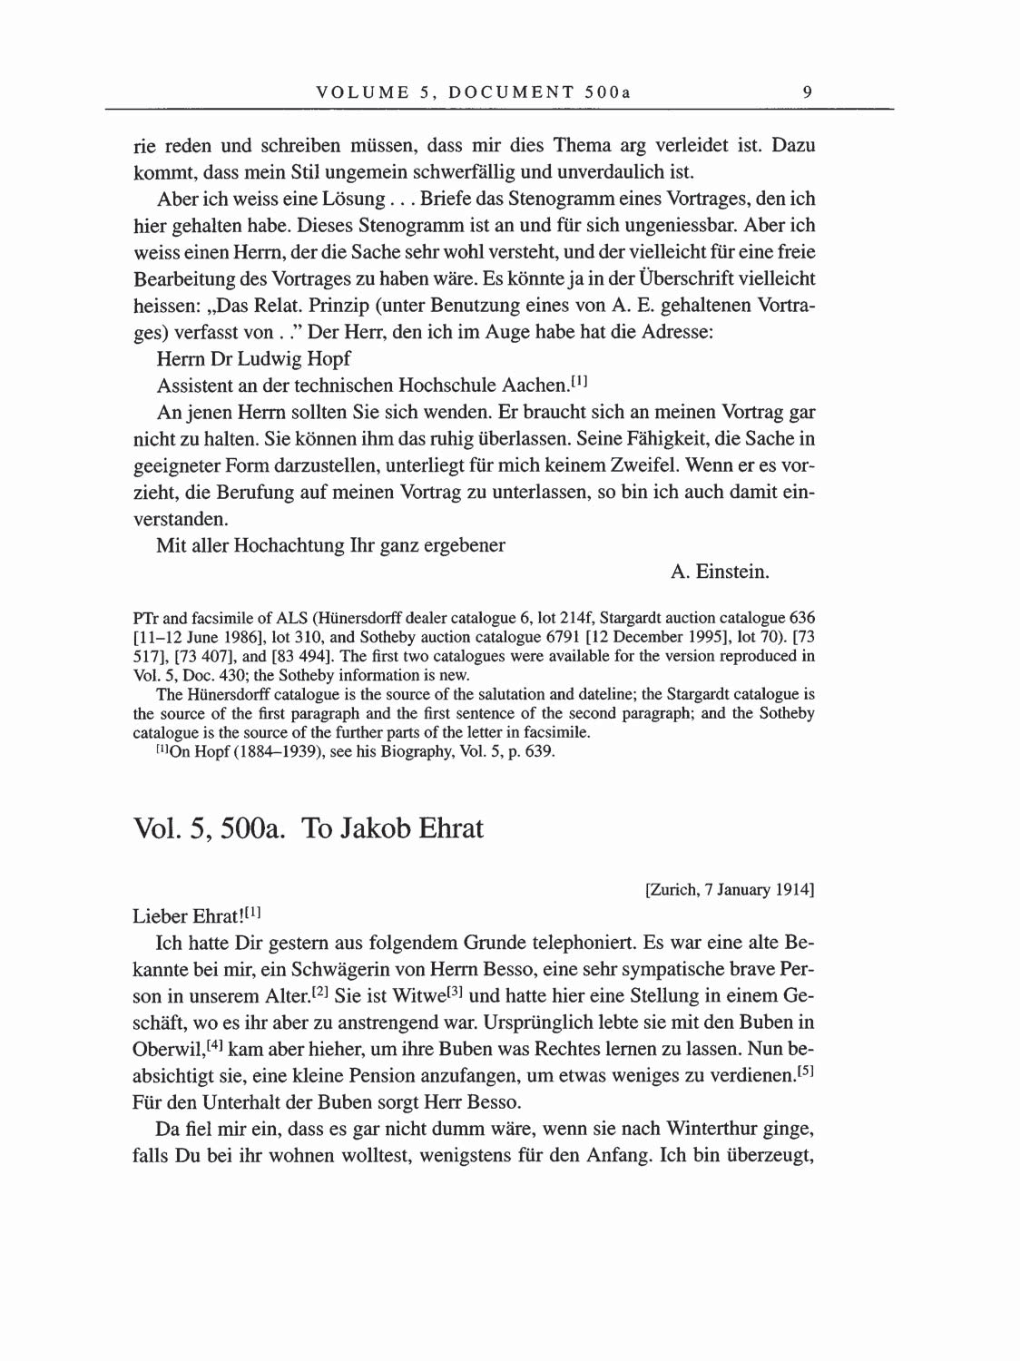 Volume 8, Part A: The Berlin Years: Correspondence 1914-1917 page 9